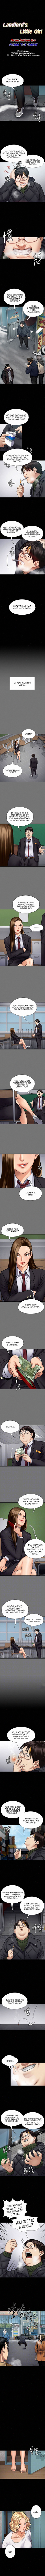 Panel Image 1 for chapter 109 of manhwa Queen Bee on read.oppai.stream